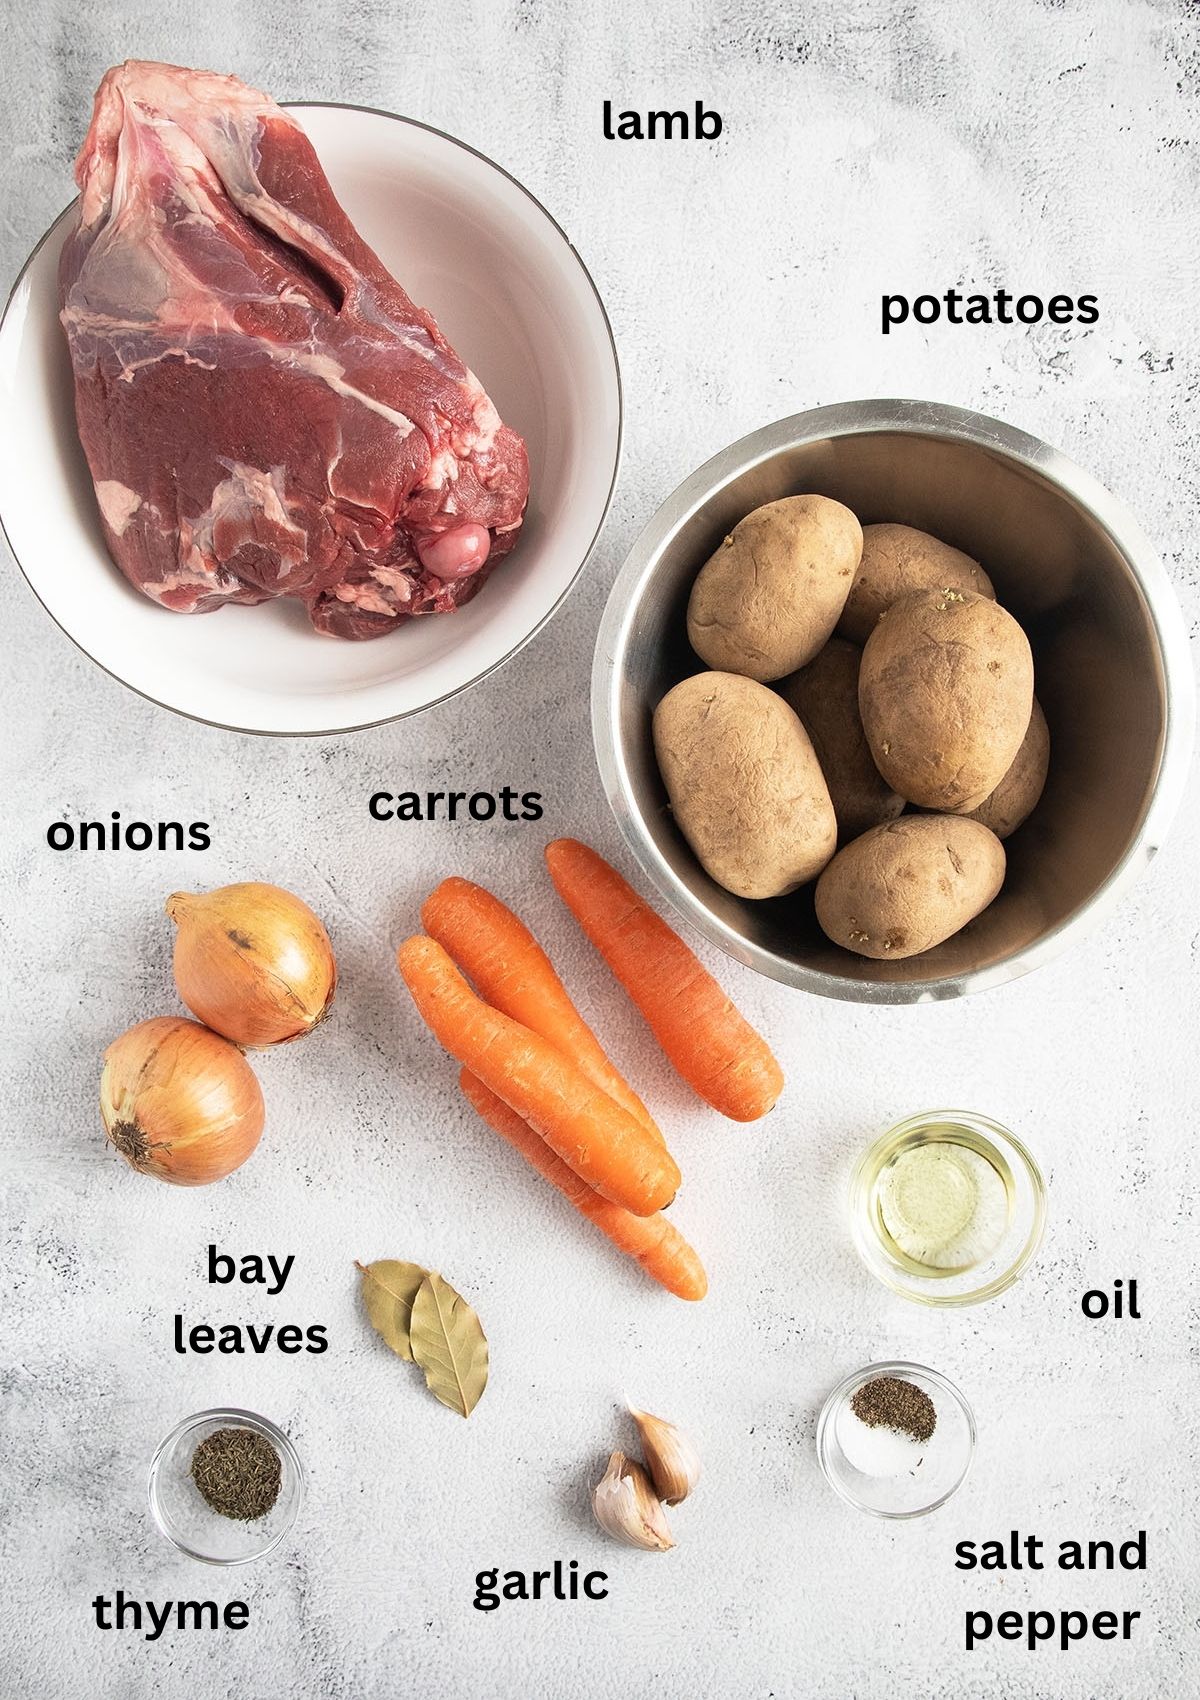 labeled ingredients for making stew with lamb cubes, potatoes, carrots, onions and spices.